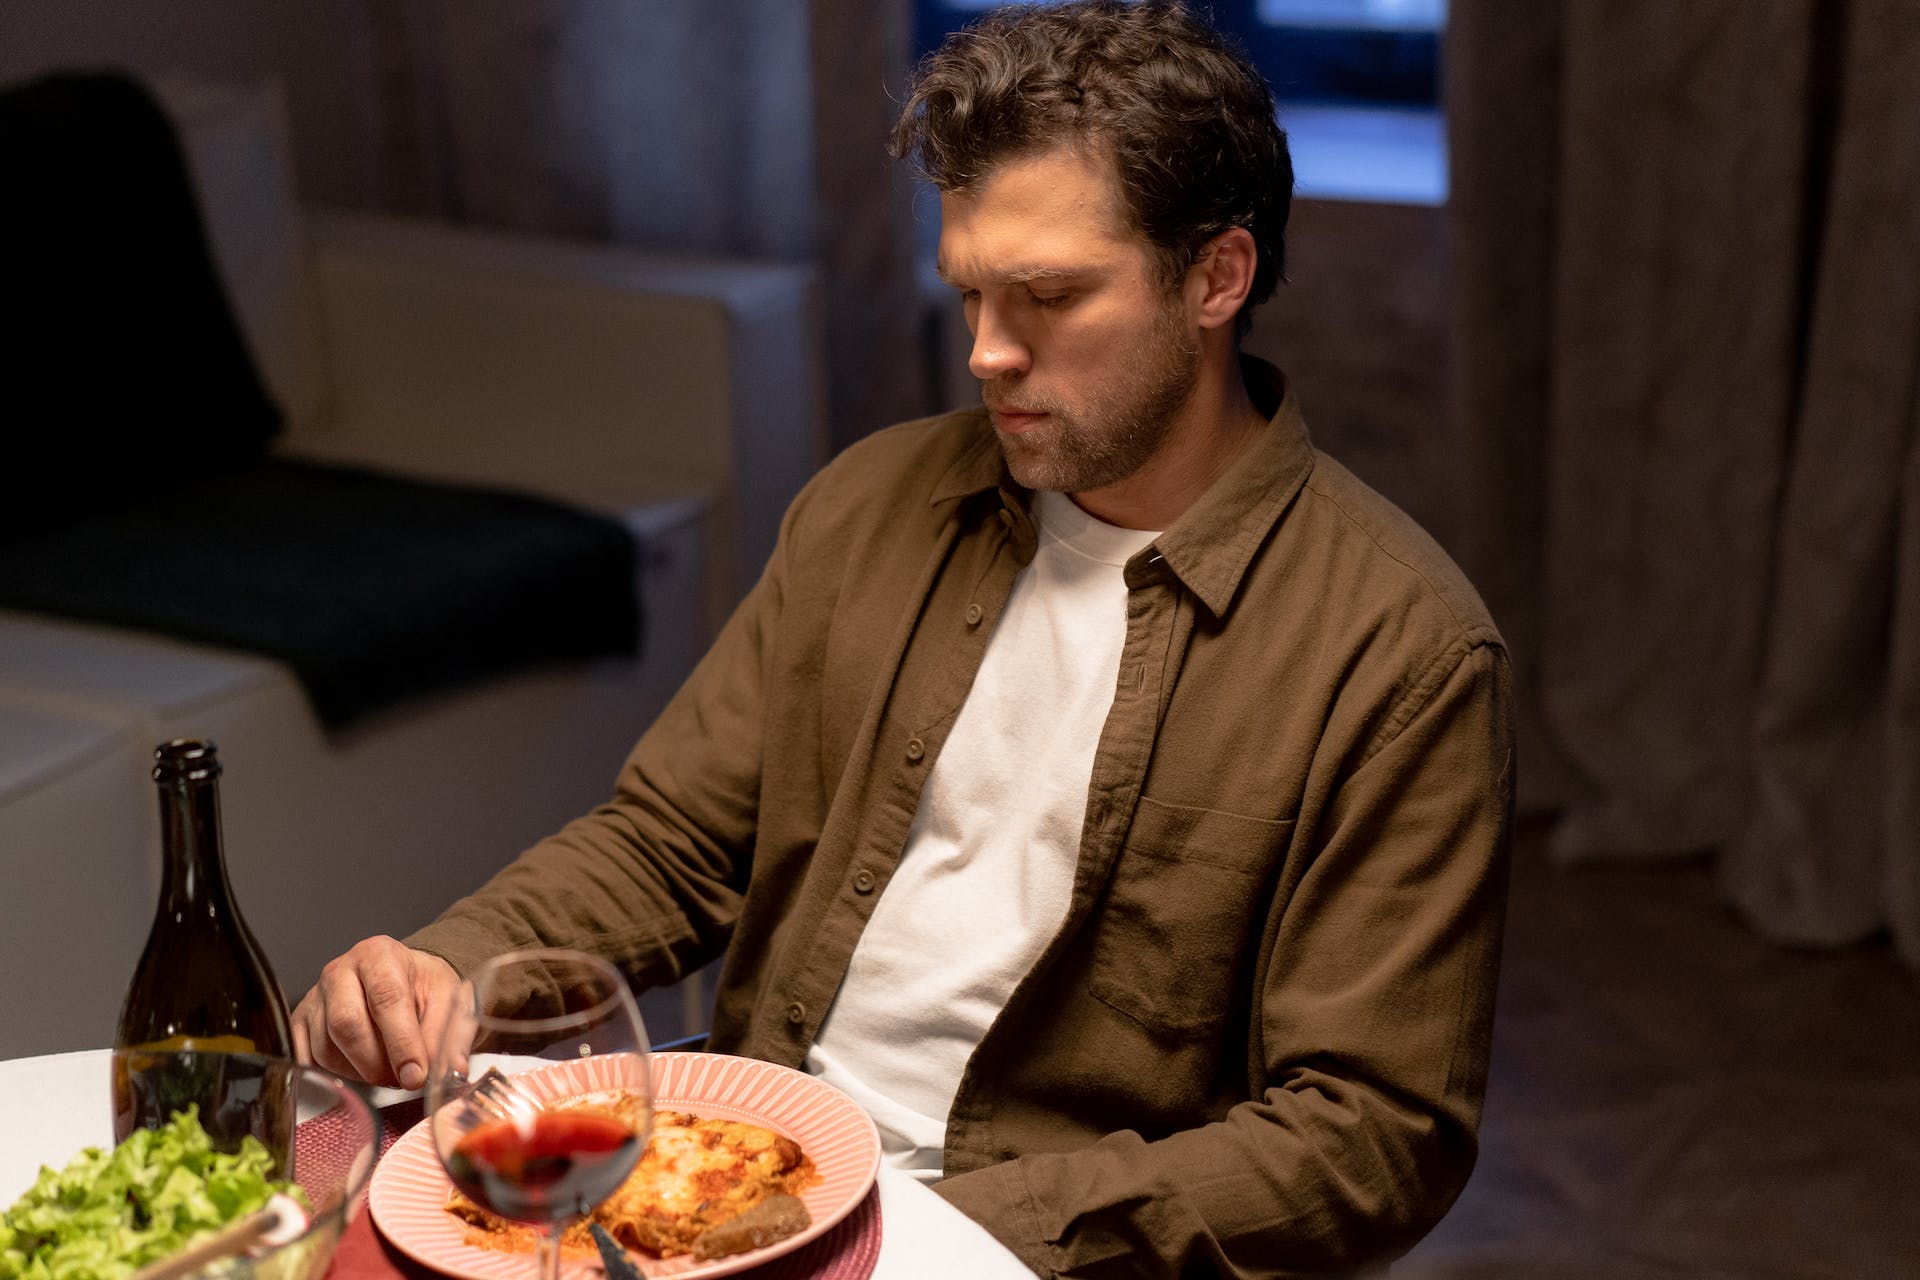 A man sitting alone at the dinner table | Source: Pexels